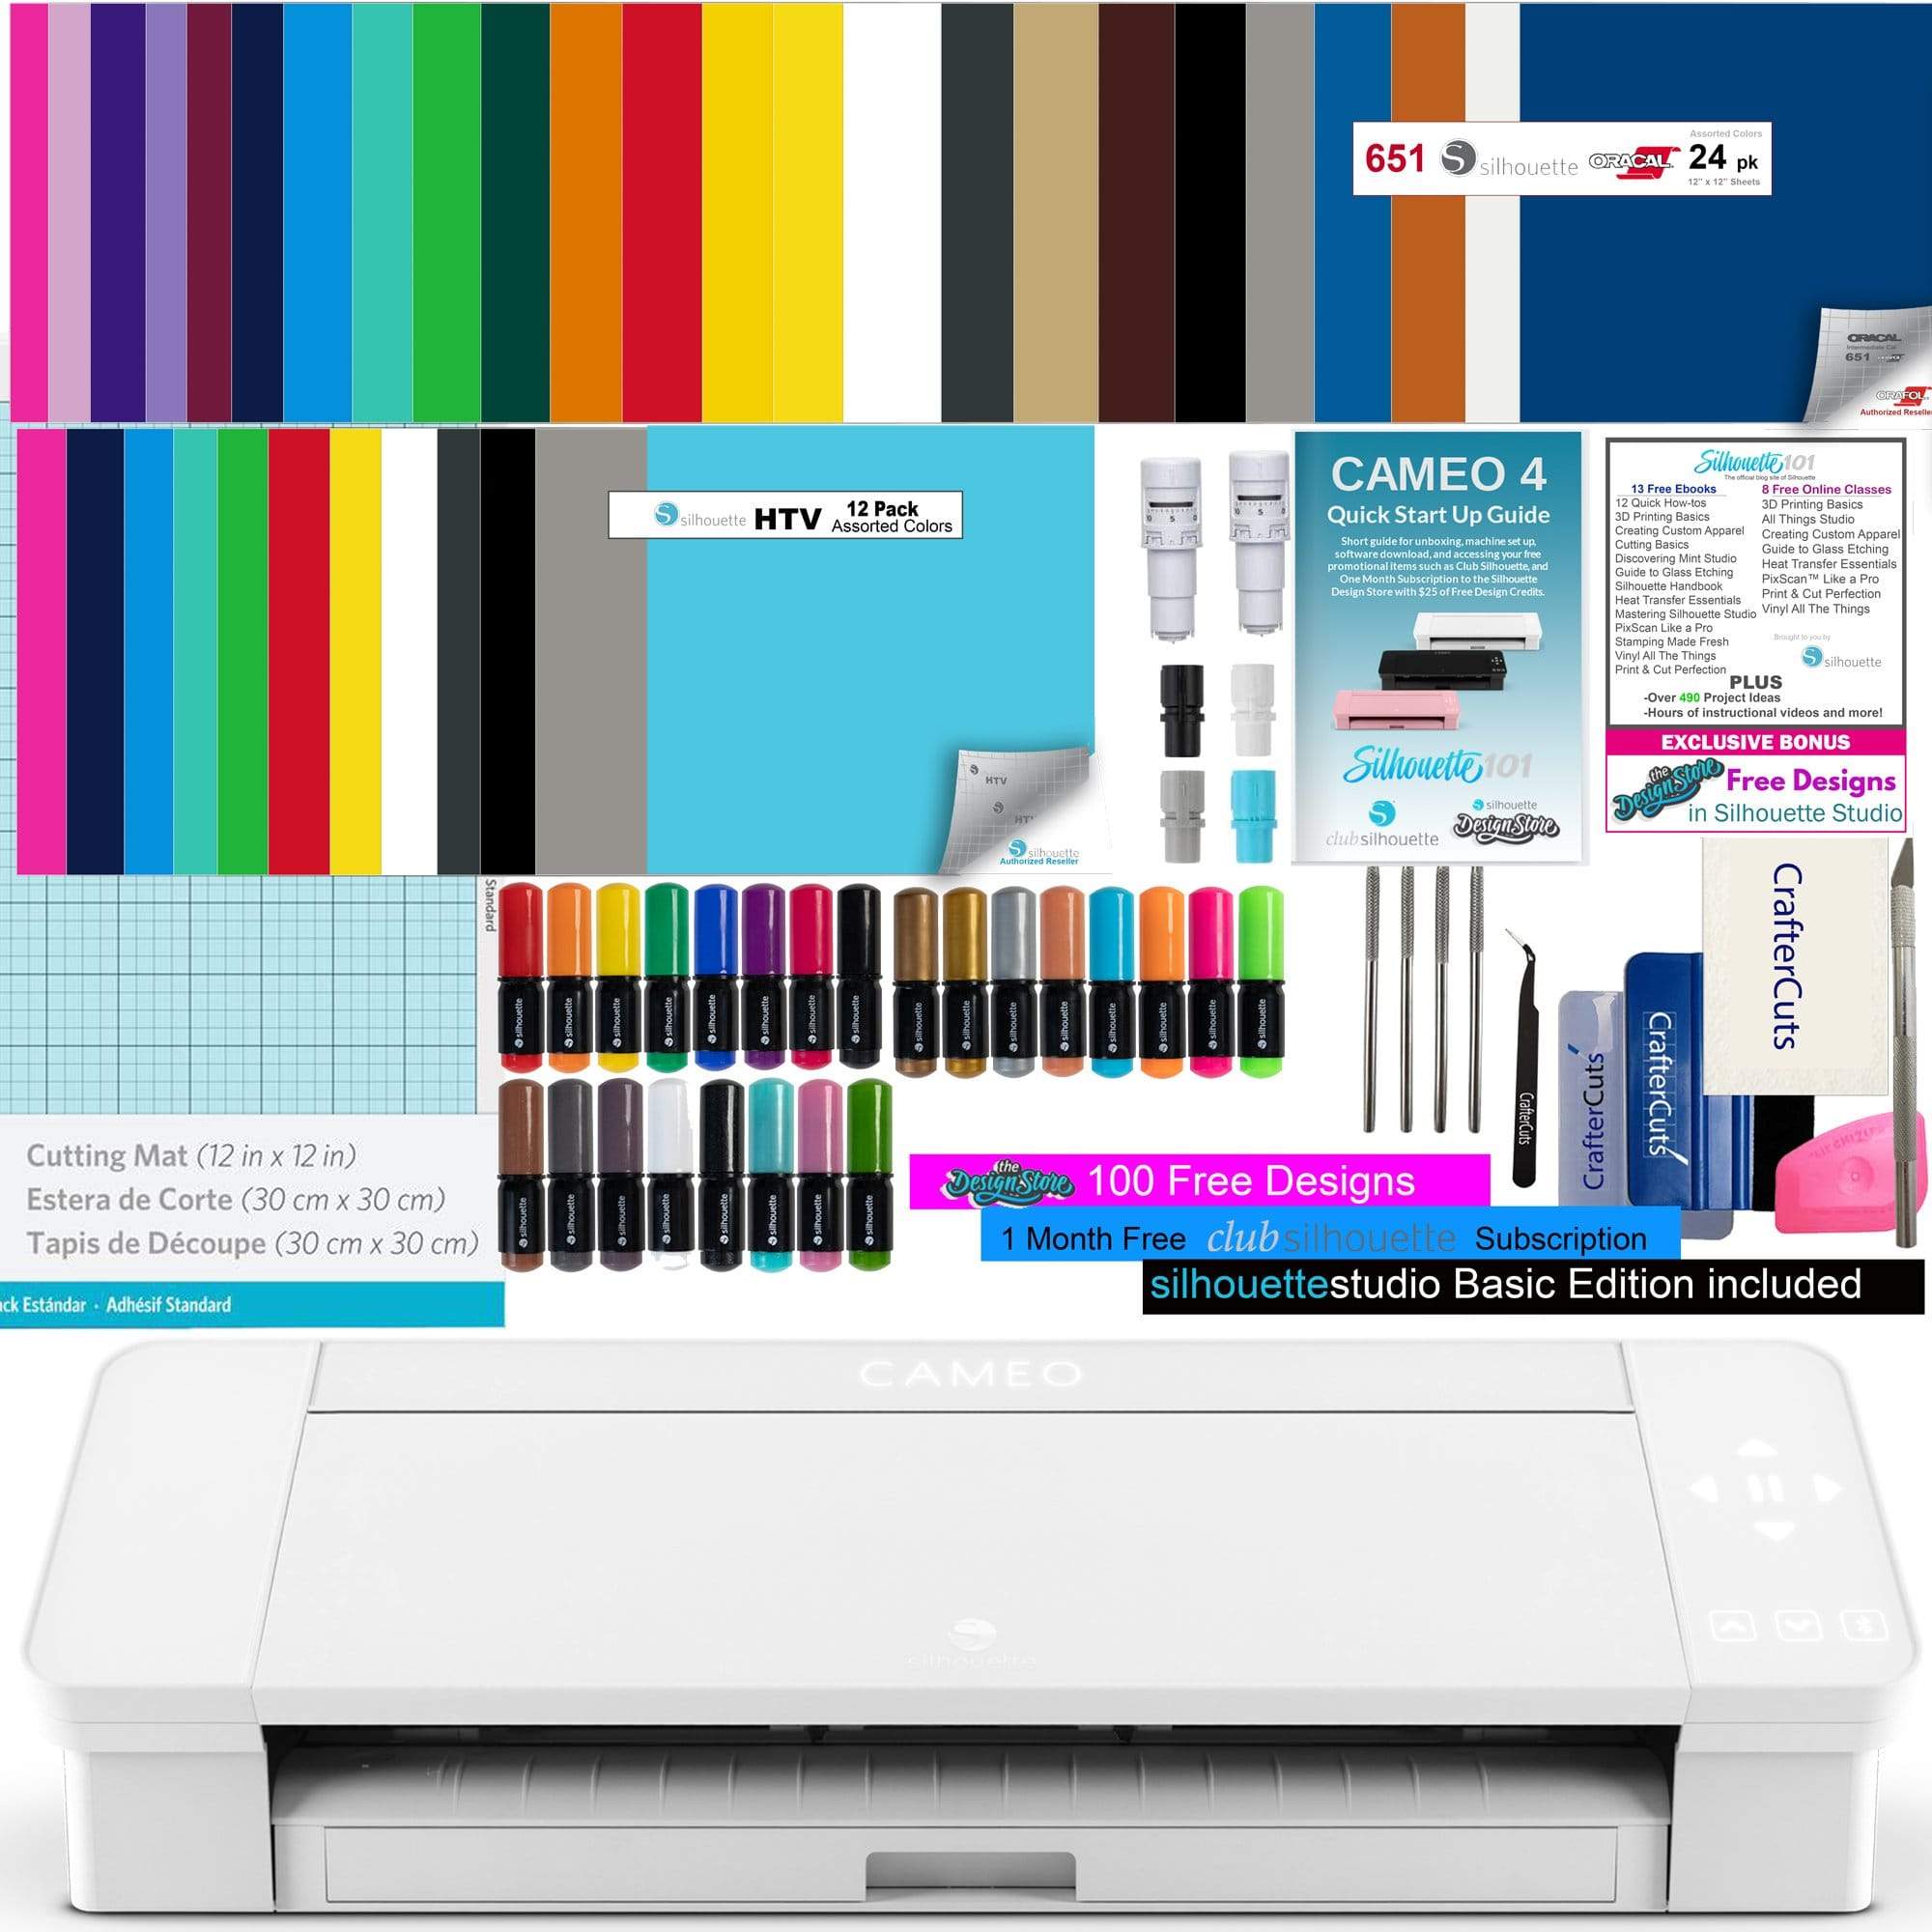 Silhouette America Silhouette Cameo 4 Deluxe Vinyl Bundle with 24 Sheets of Vinyl, 12 sheets of HTV, 24 Pack pens, Vinyl Tool Kit, 2 Autoblades, and 150 Designs- White